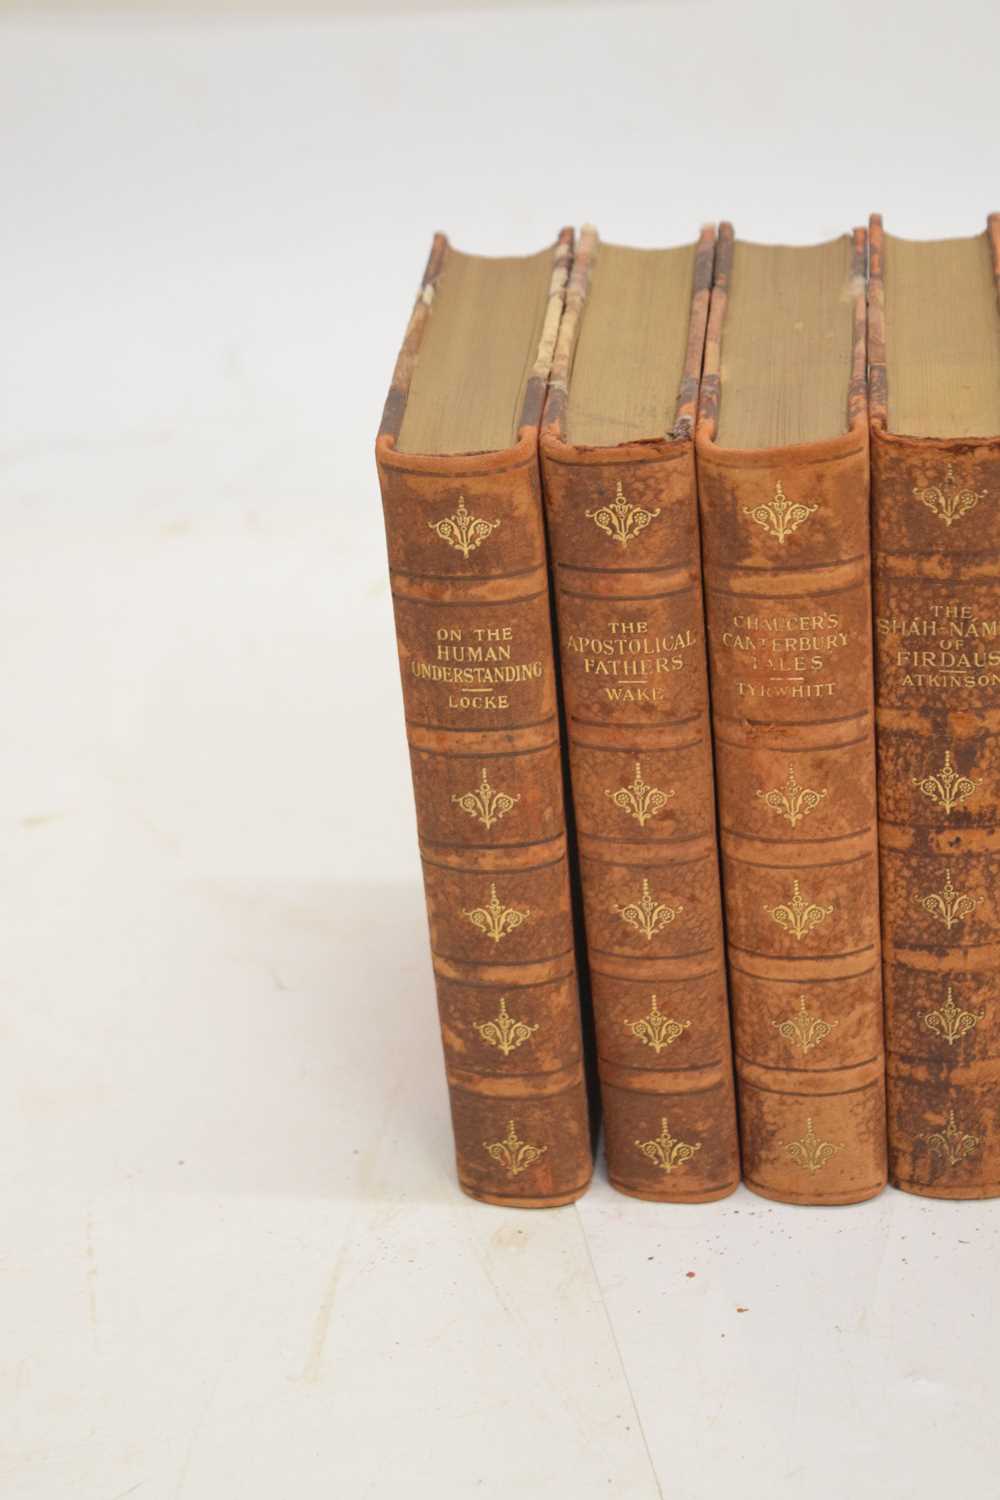 Twenty volumes from 'Sir John Lubbock's Hundred Books', leather bound, circa 1898 - Image 3 of 10